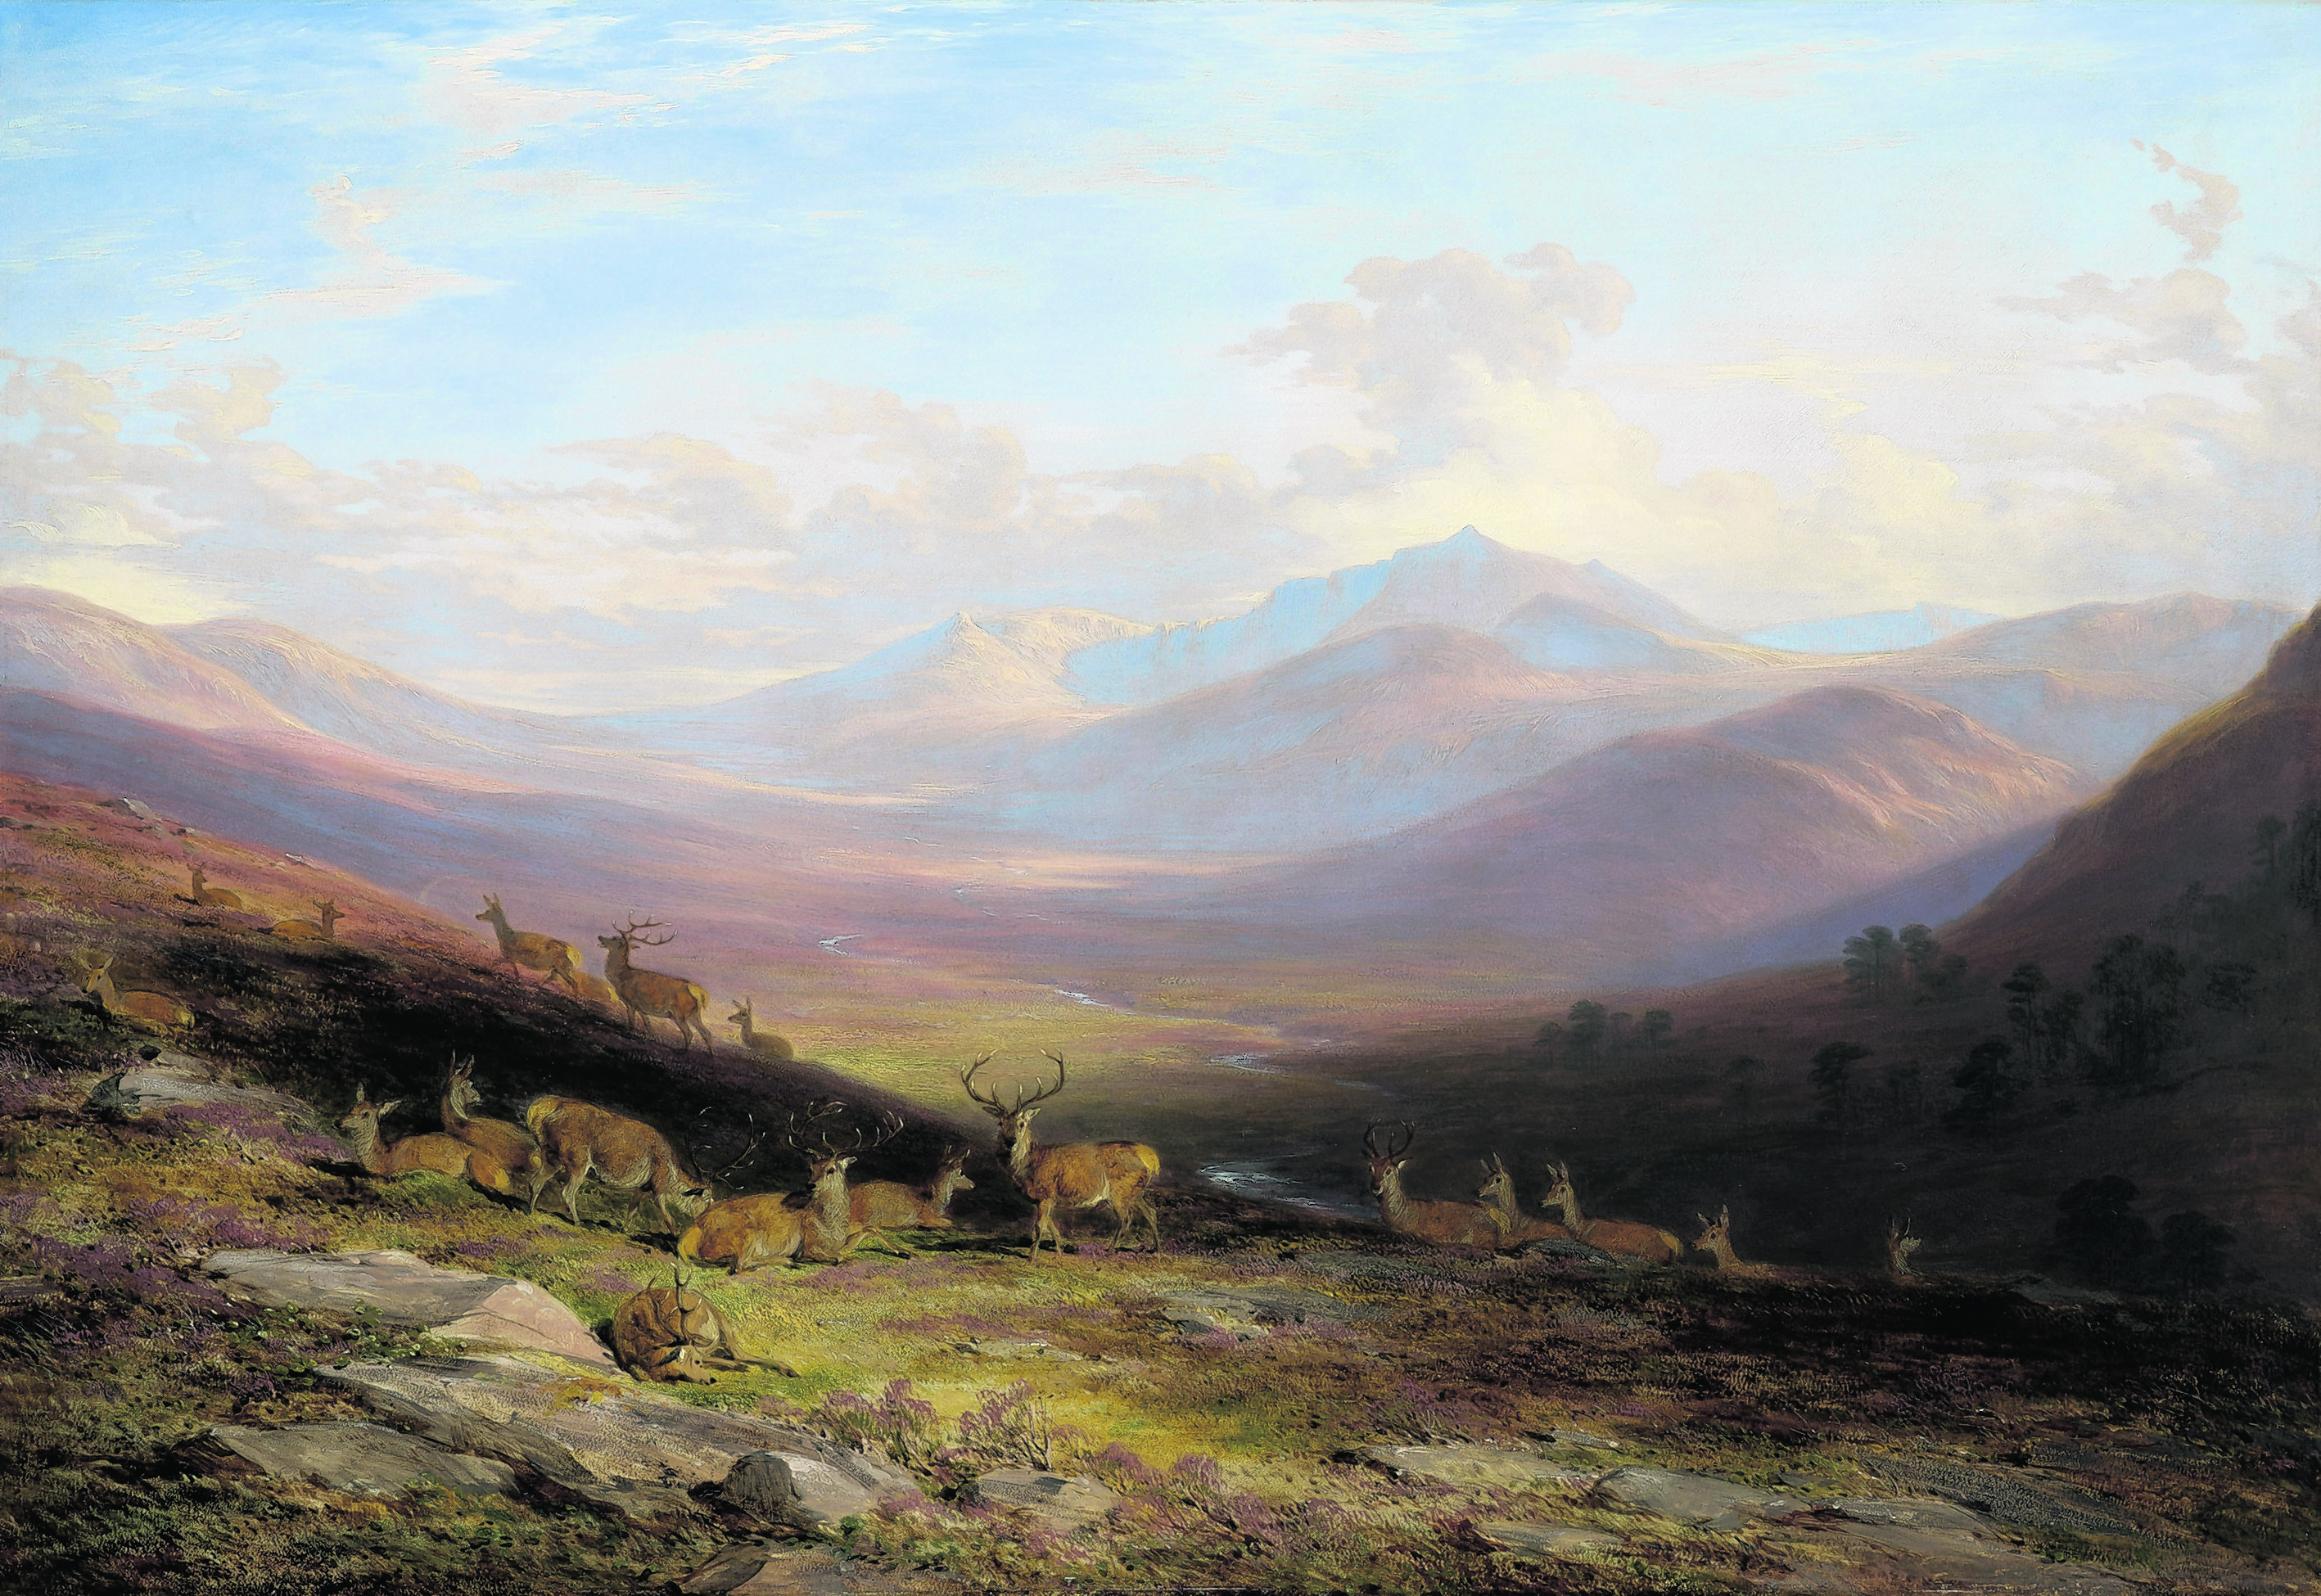 James Giles, A View of Lochnagar, 1848. Oil on panel